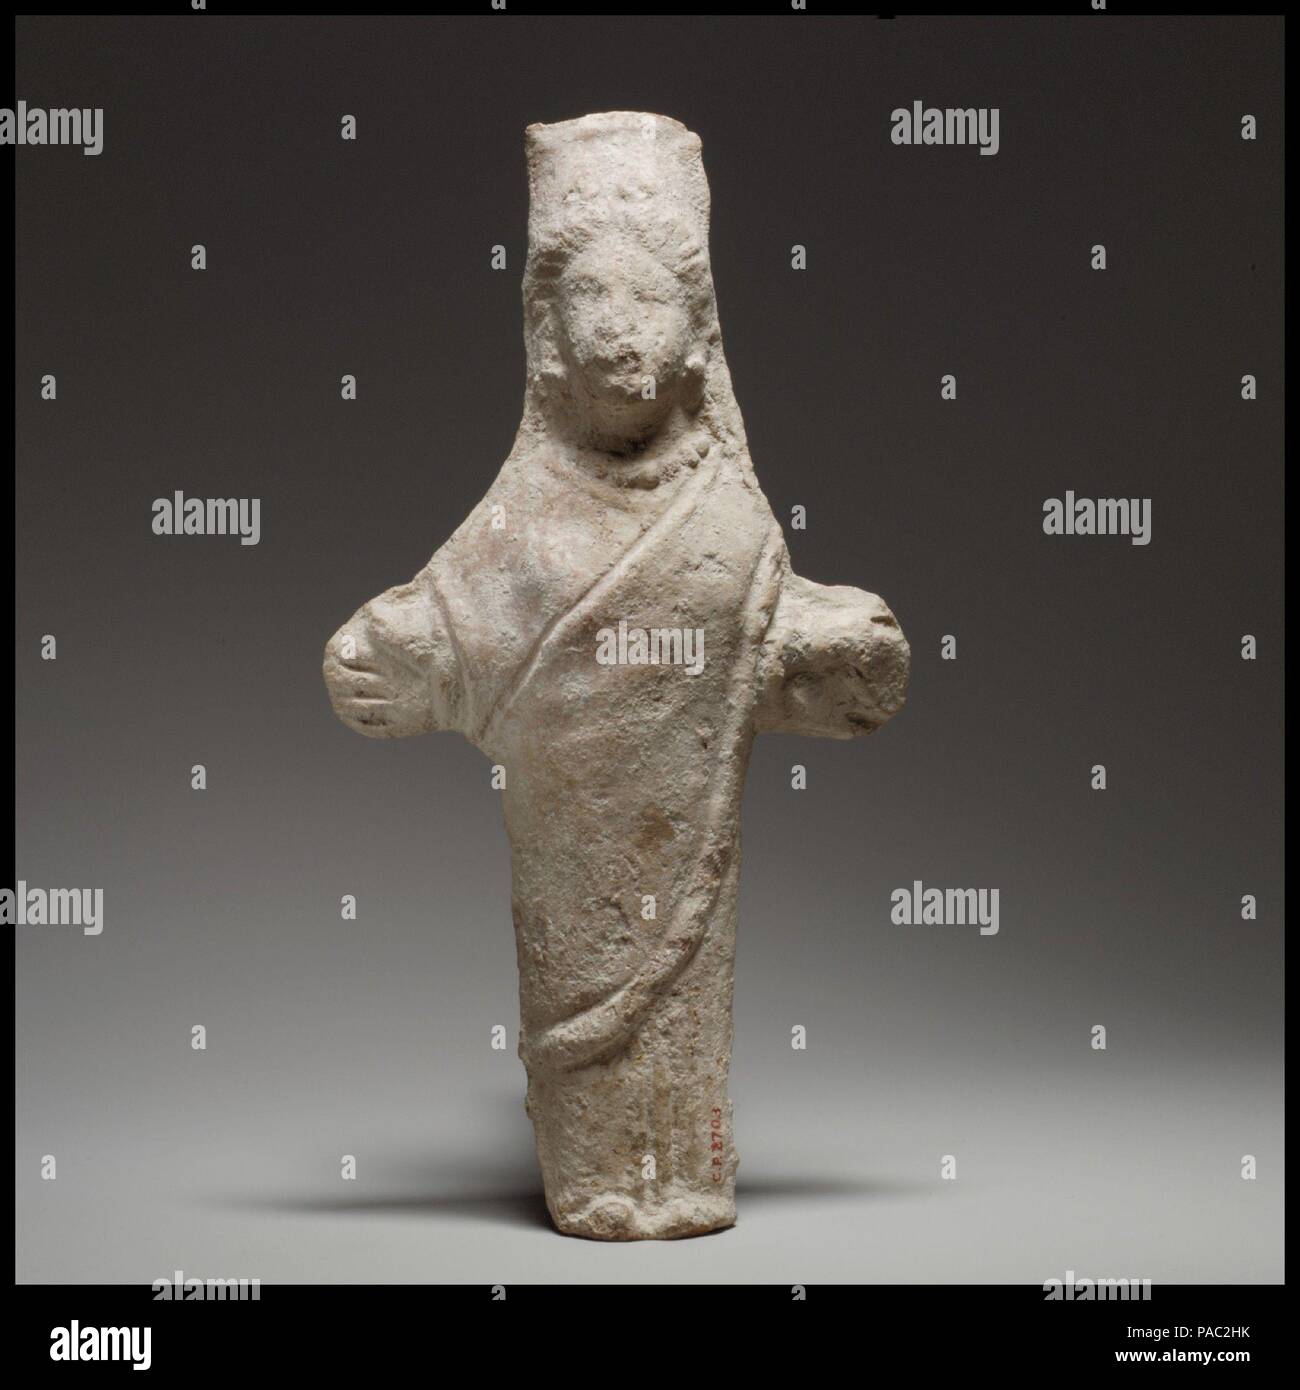 Standing female figurine (cruciform). Culture: Cypriot. Dimensions: H. 9 1/8 in. (23.2 cm). Date: 4th century B.C.(?).  The solid head and body are mold-made, the arms handmade. The back is handmade, flat, and pared. The crude, cruciform figure is in a frontal pose, the feet close together. Museum: Metropolitan Museum of Art, New York, USA. Stock Photo